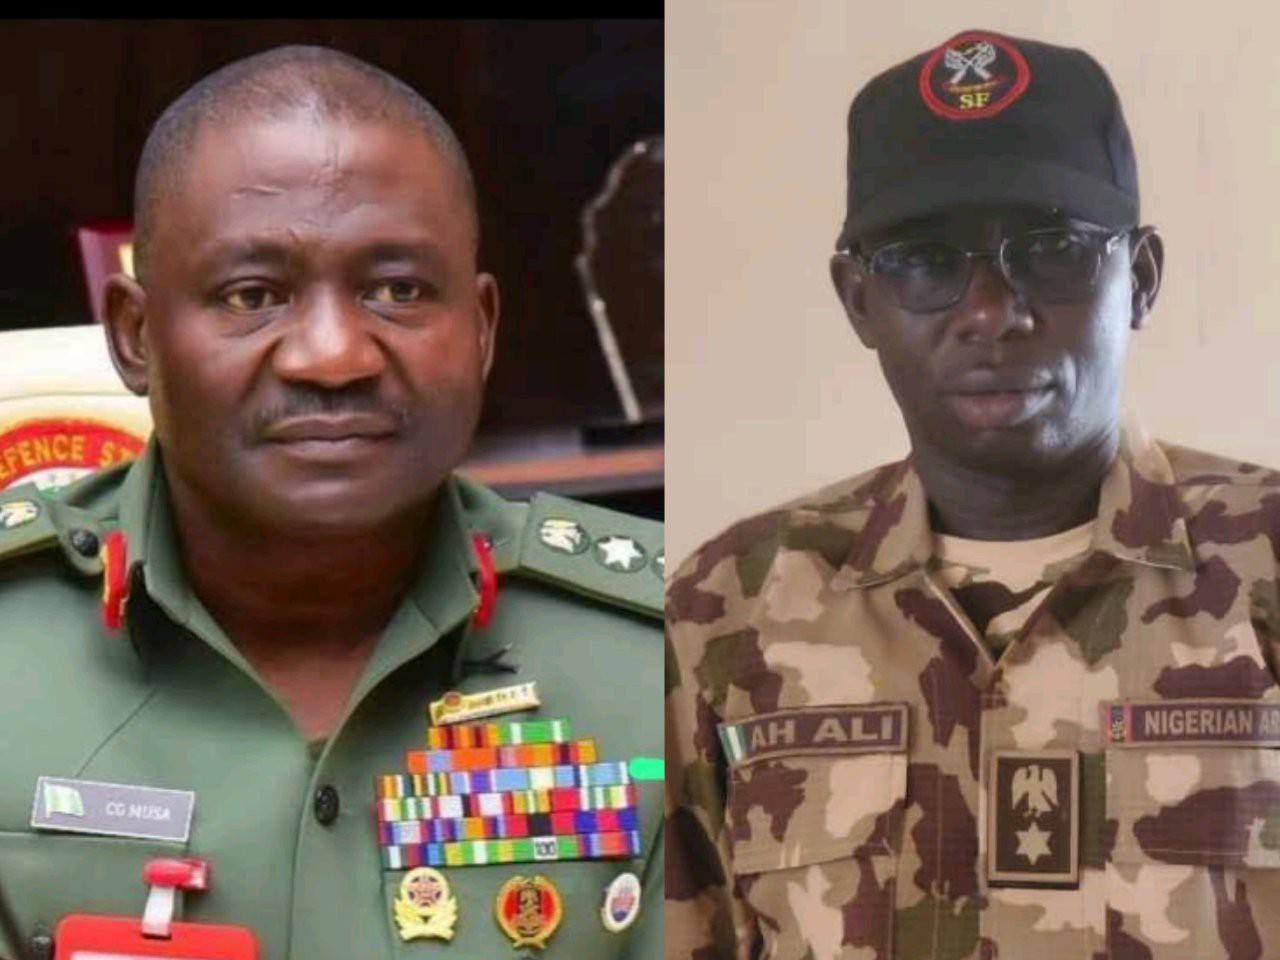 Col. Ah Ahli: Gen Musa statement. 'If He Had Gone To Okuama Being Armed, He Would Have Erased Everybody'